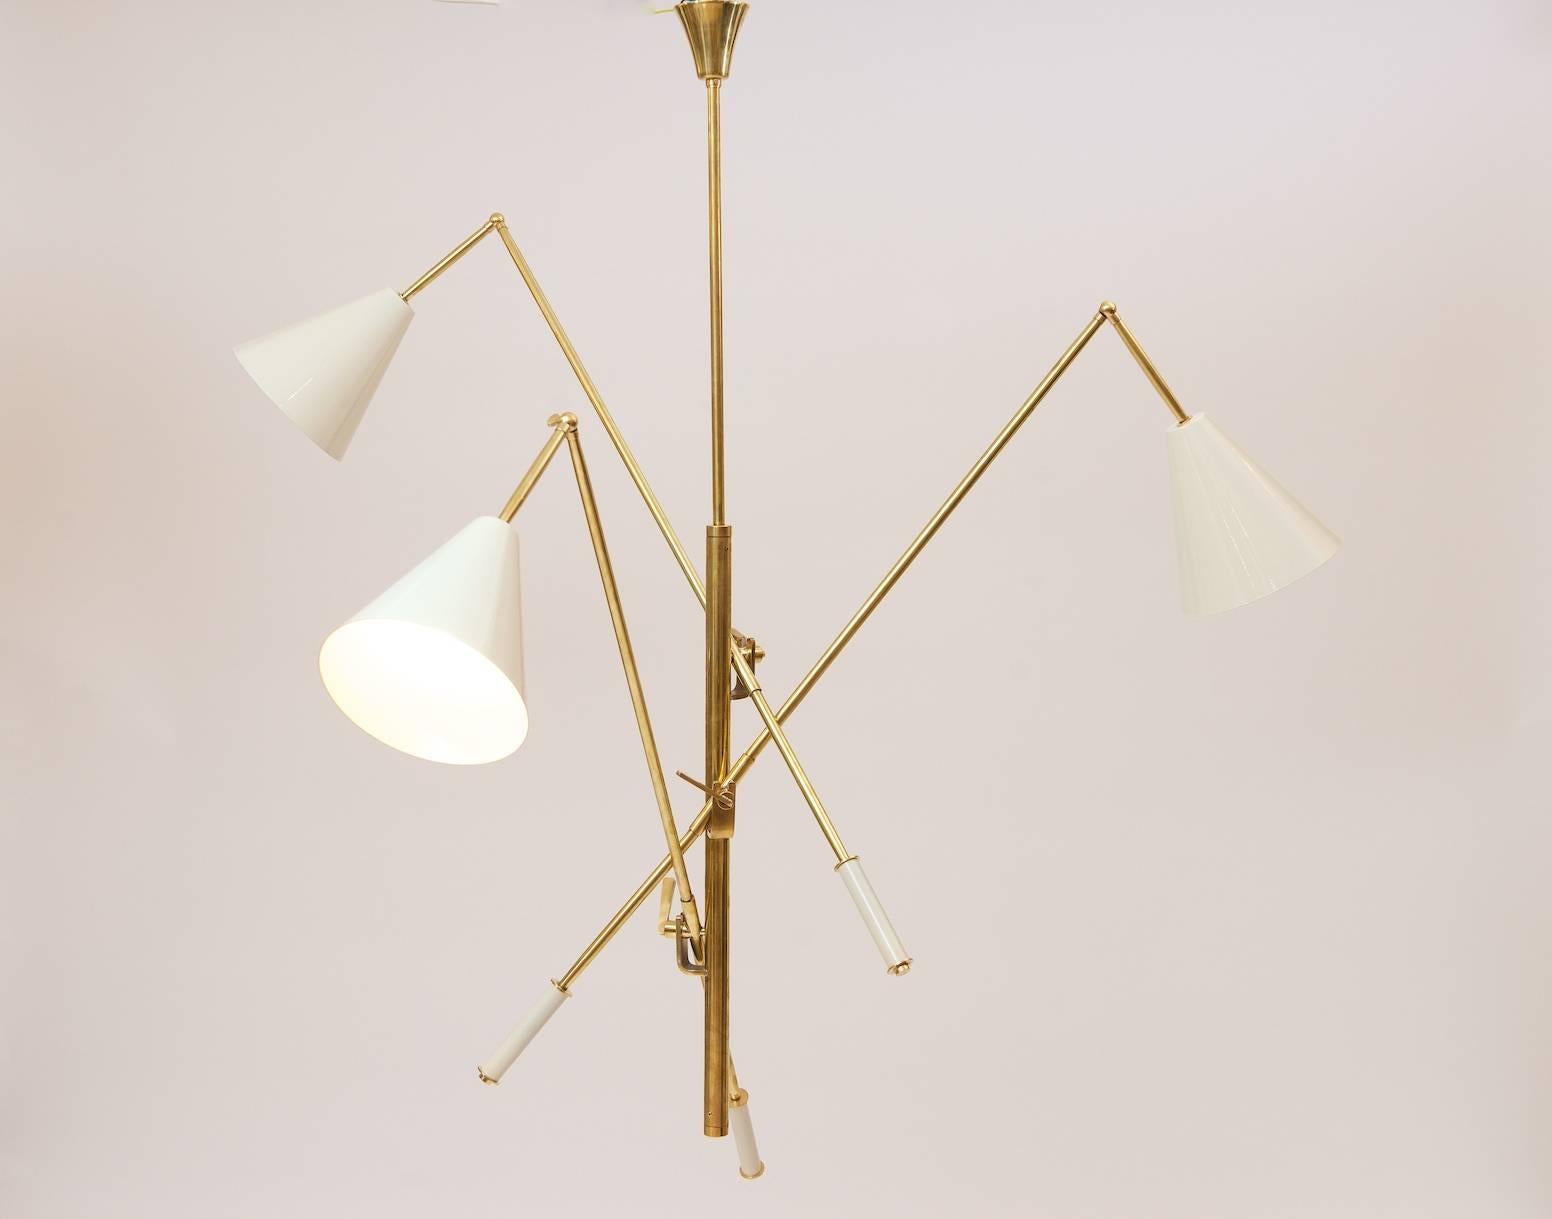 Painted metal and brass three shade ceiling light.
Based on the Triennale.
Excellent quality.

Central pole measures 120cm  (this can be shortened if required.)
Each arm measures 107cm to the ball joint of the shade
Shade measures 20.5cm(l) x